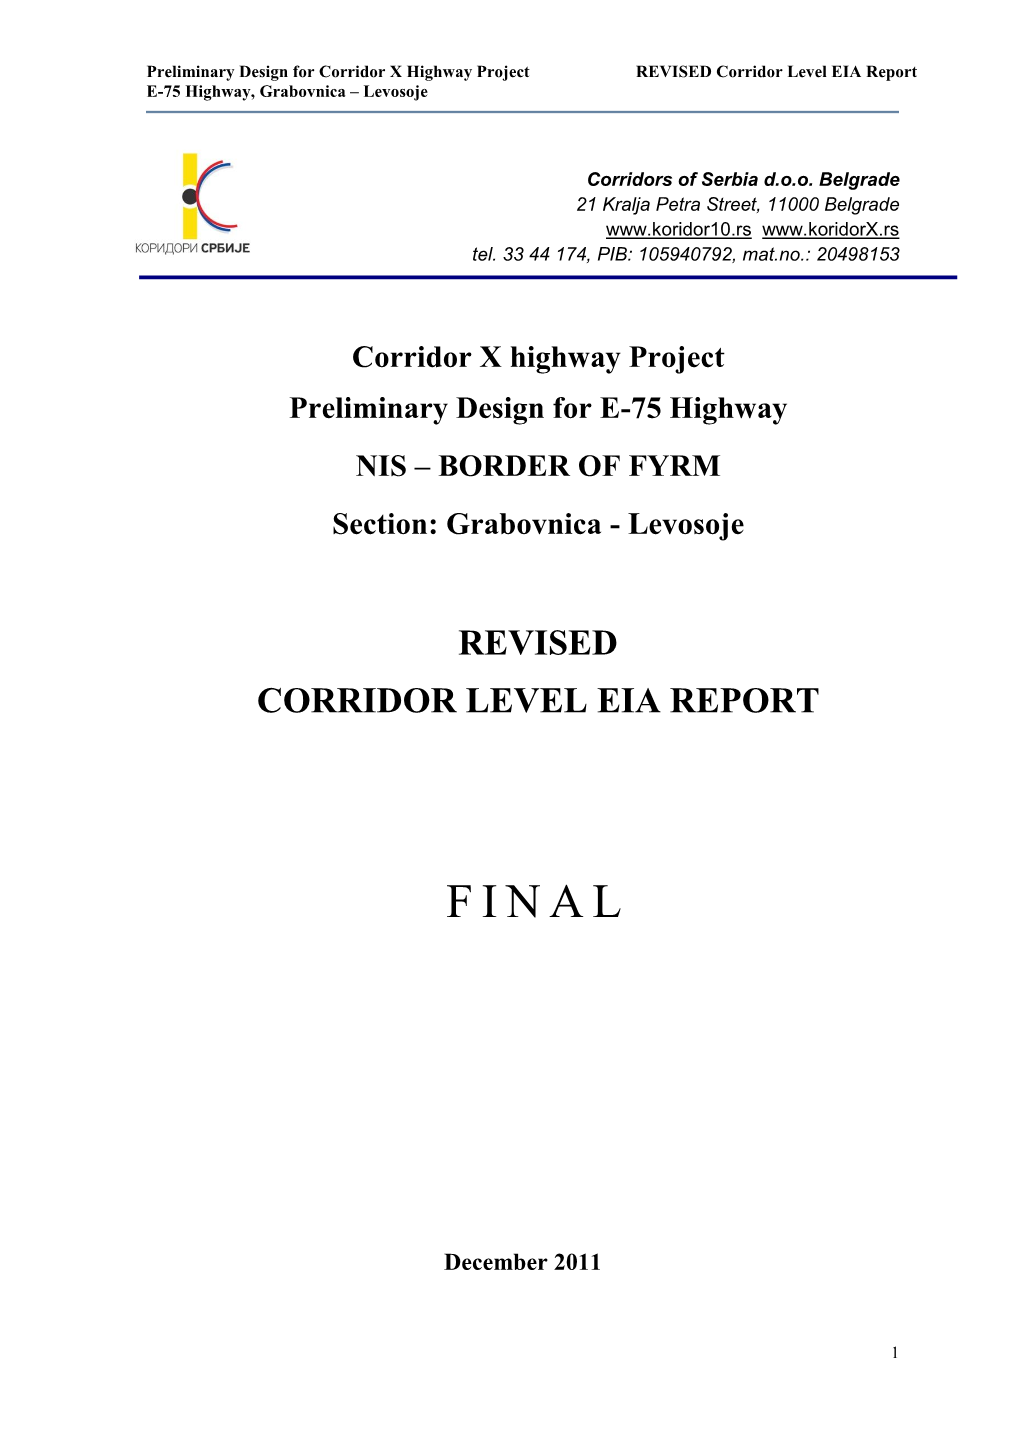 Finally, a Detailed Designs of Environmental Protection for Each Highway Sub Section Are Produced As Well